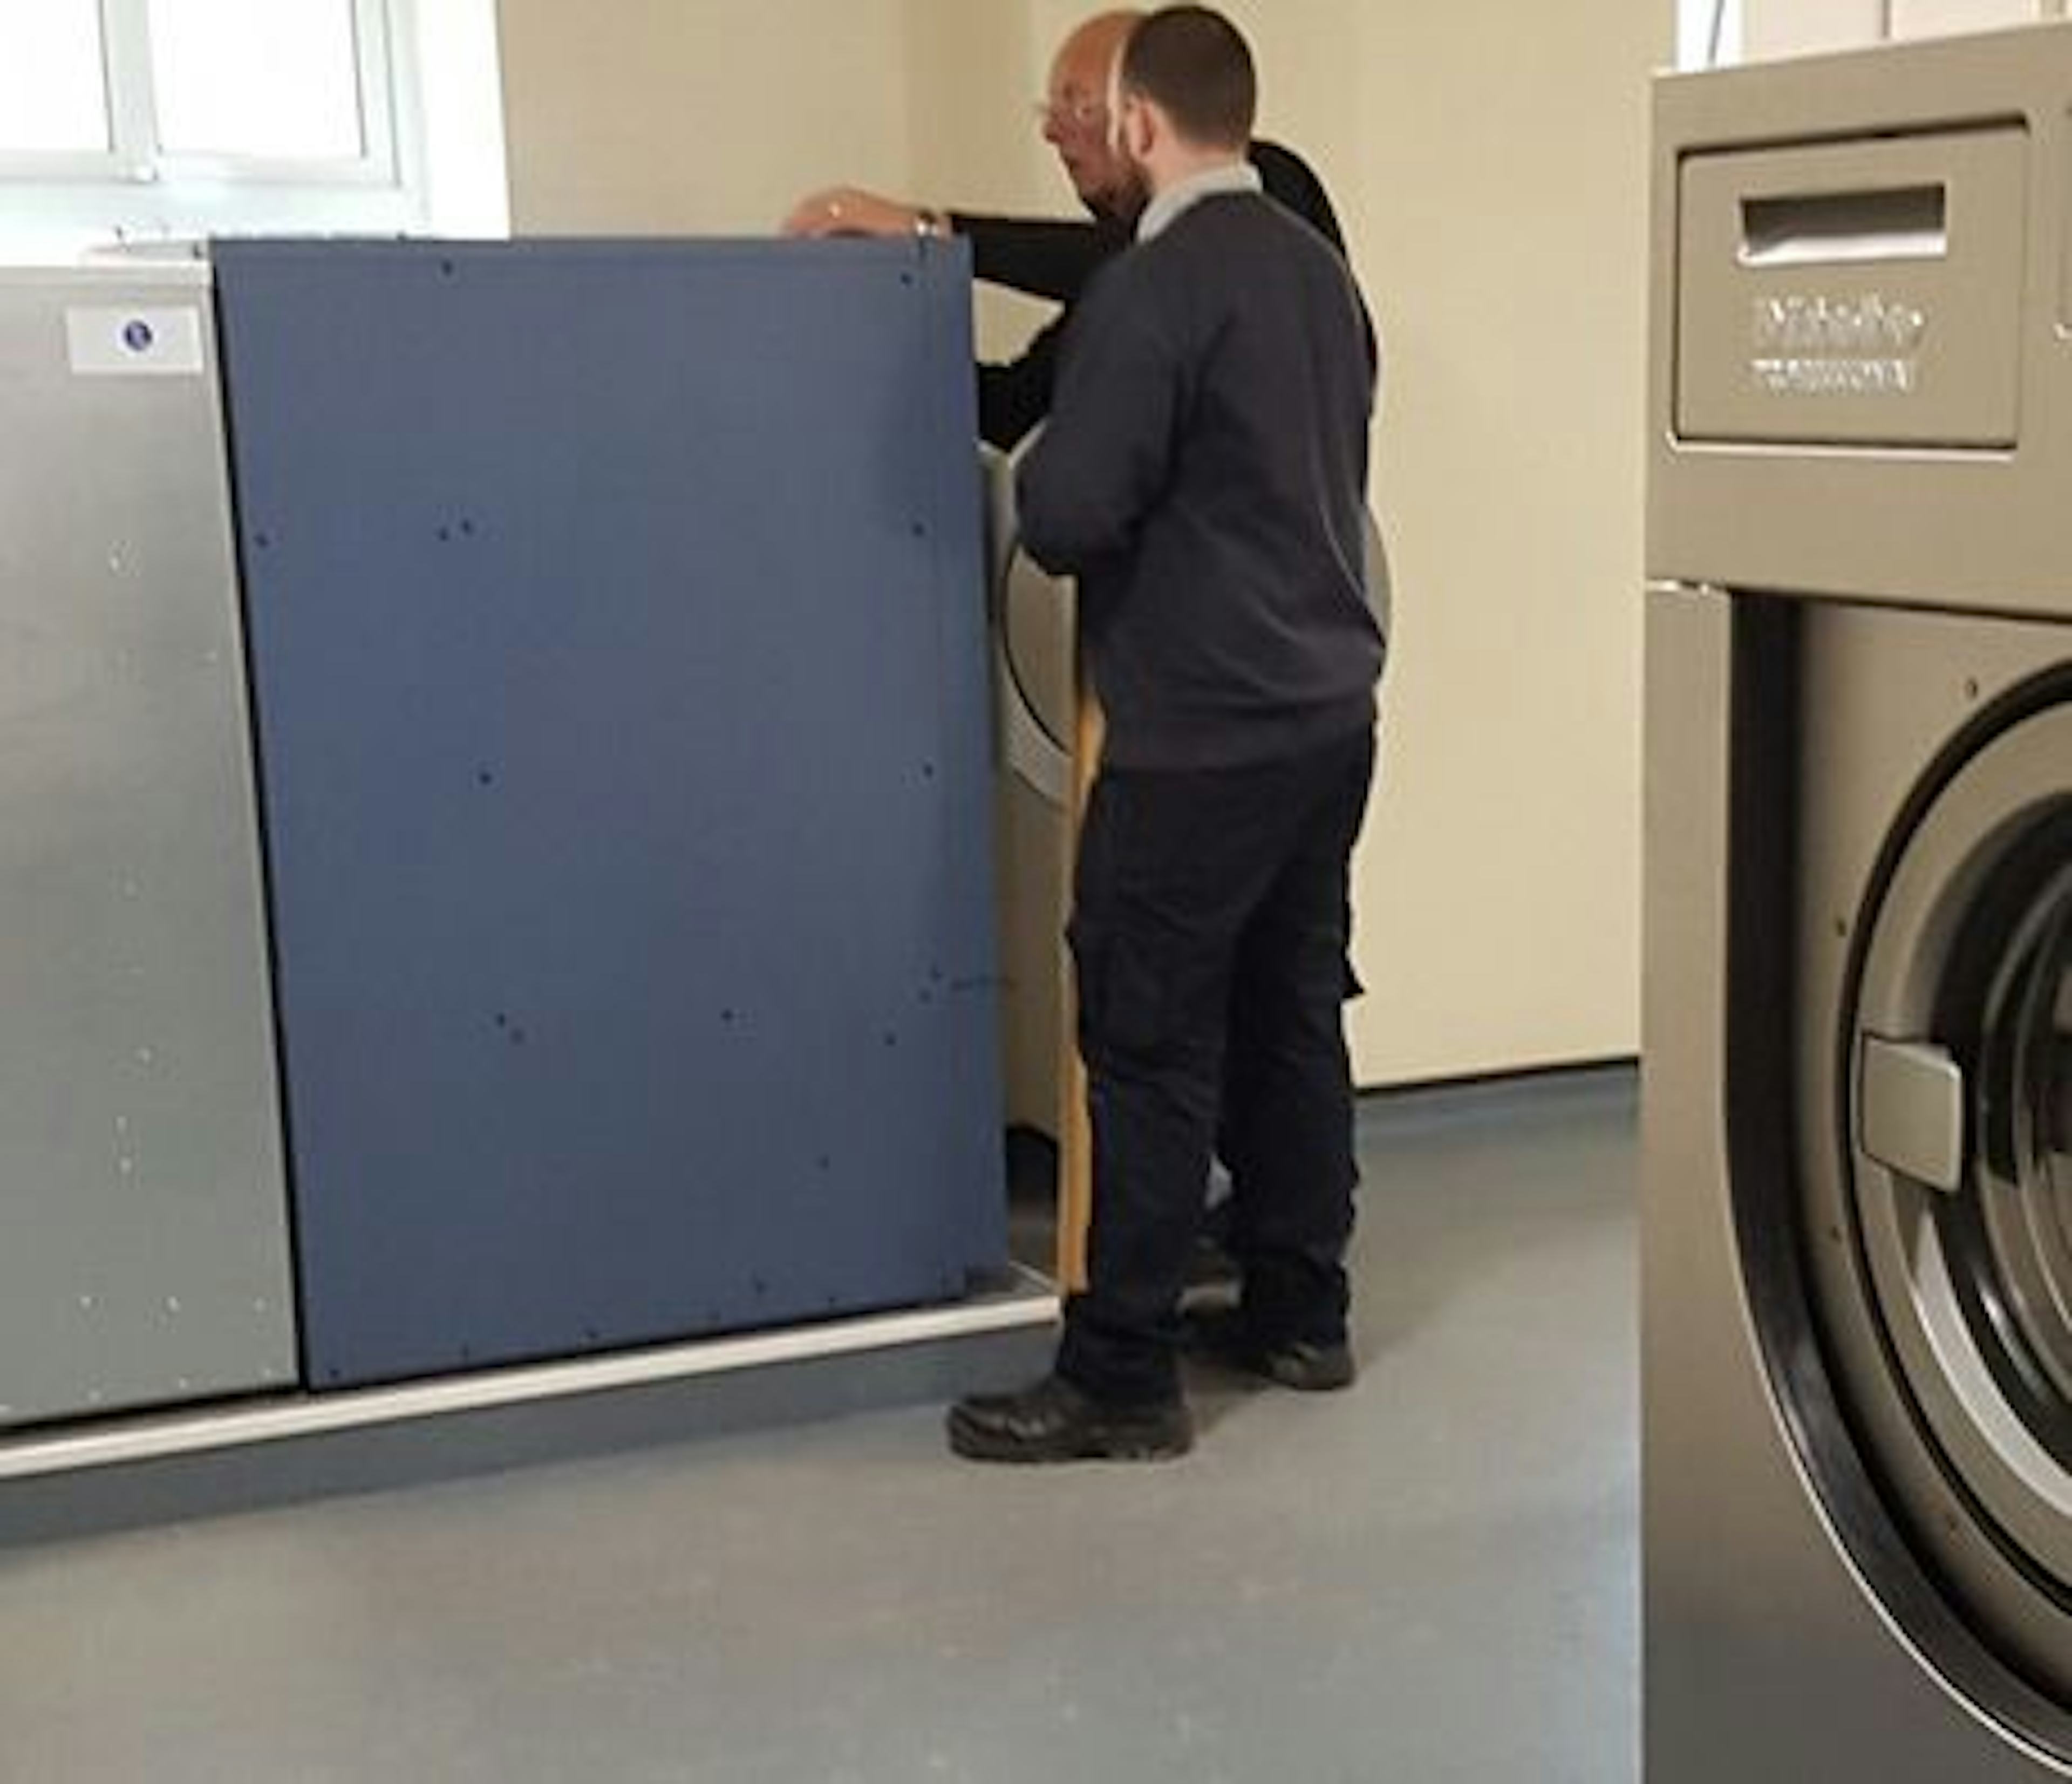 A New Build Care Home Chooses Miele Professional’s Dryers and Saves up to 60% on Energy Costs.